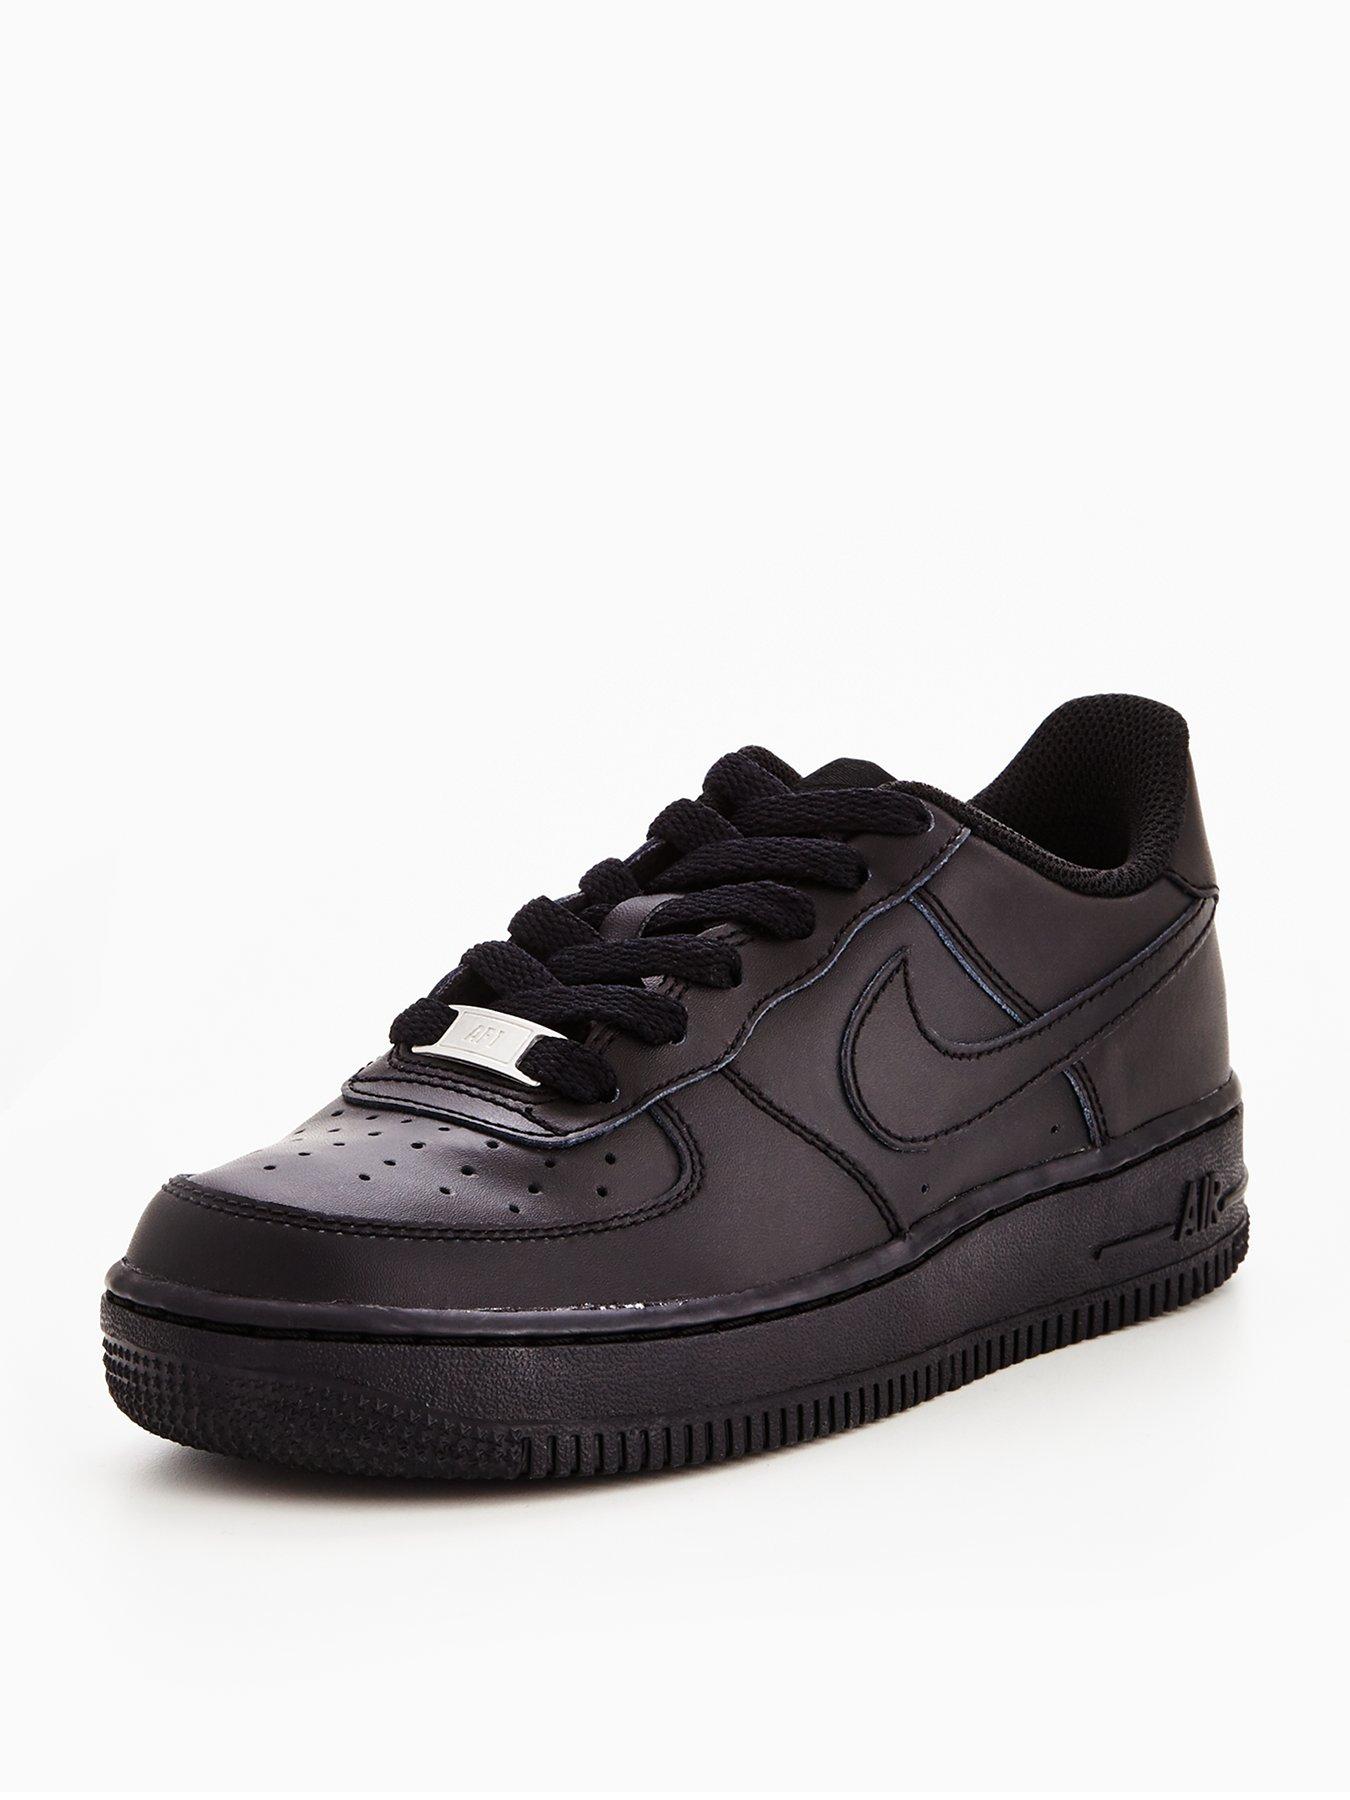 air force 1 kid size